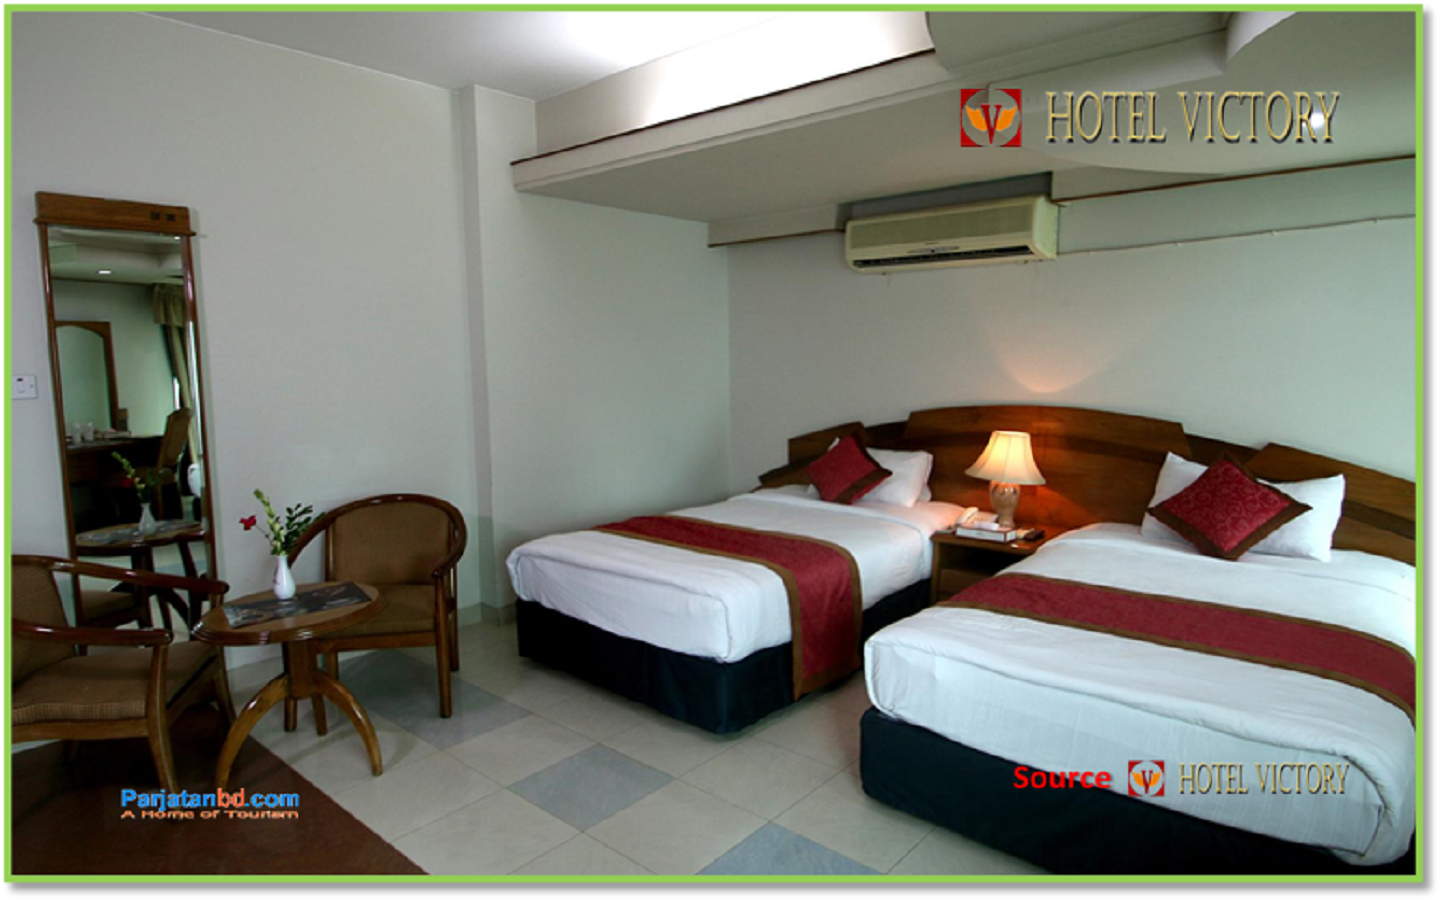 Room Super Deluxe Twin -1, Hotel Victory Limited, Naya Paltan